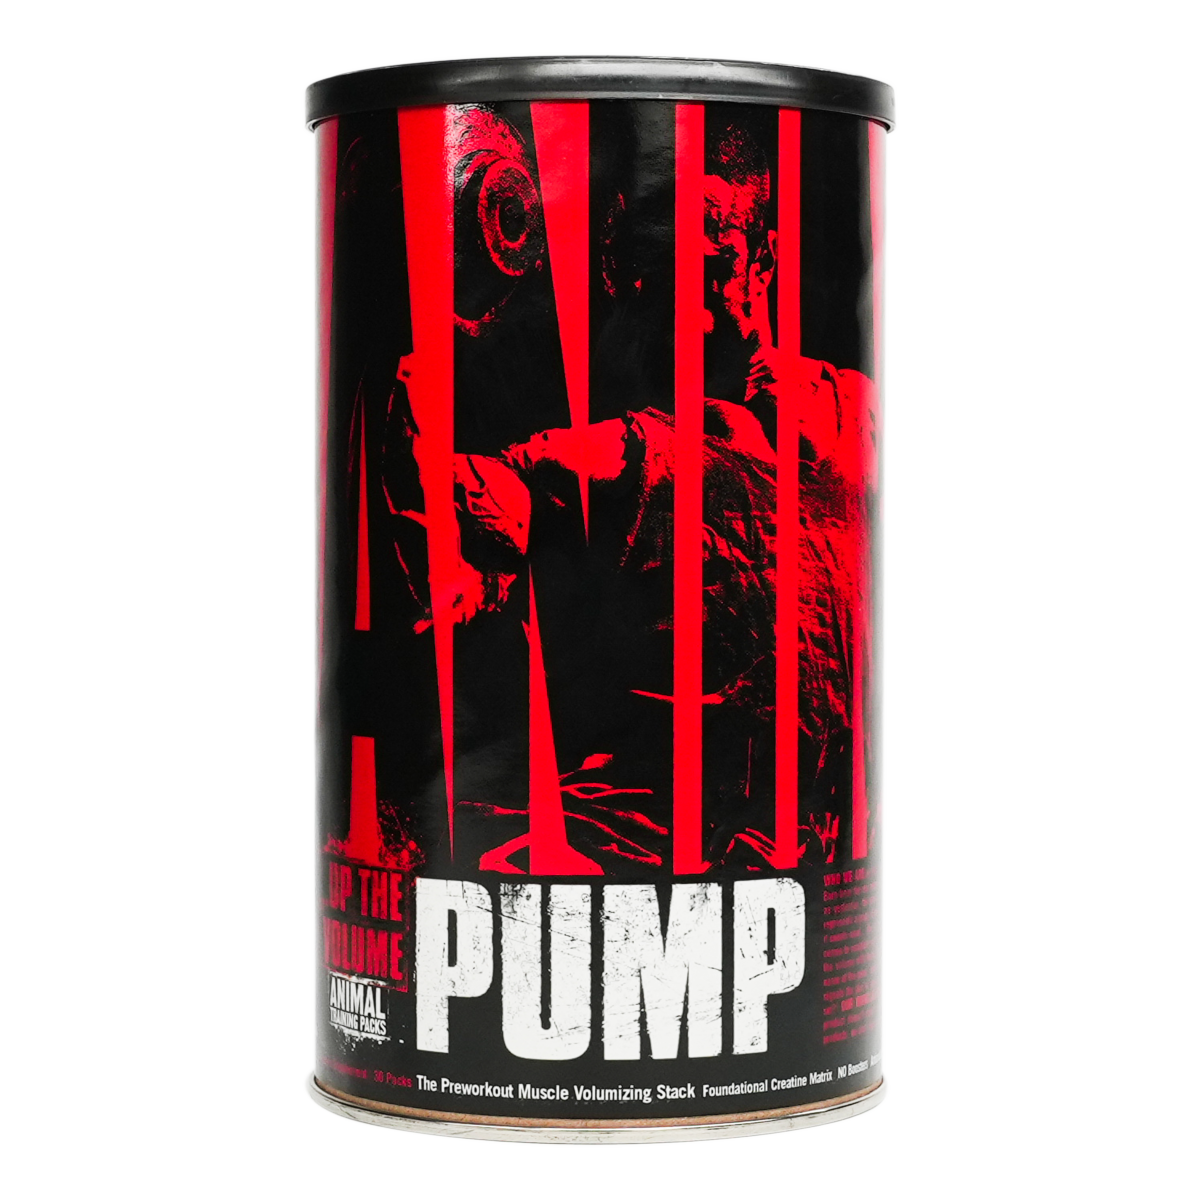 Universal Nutrition – Animal Pump, Pre-workout Muscle Volumizing Stack – 30 Packs